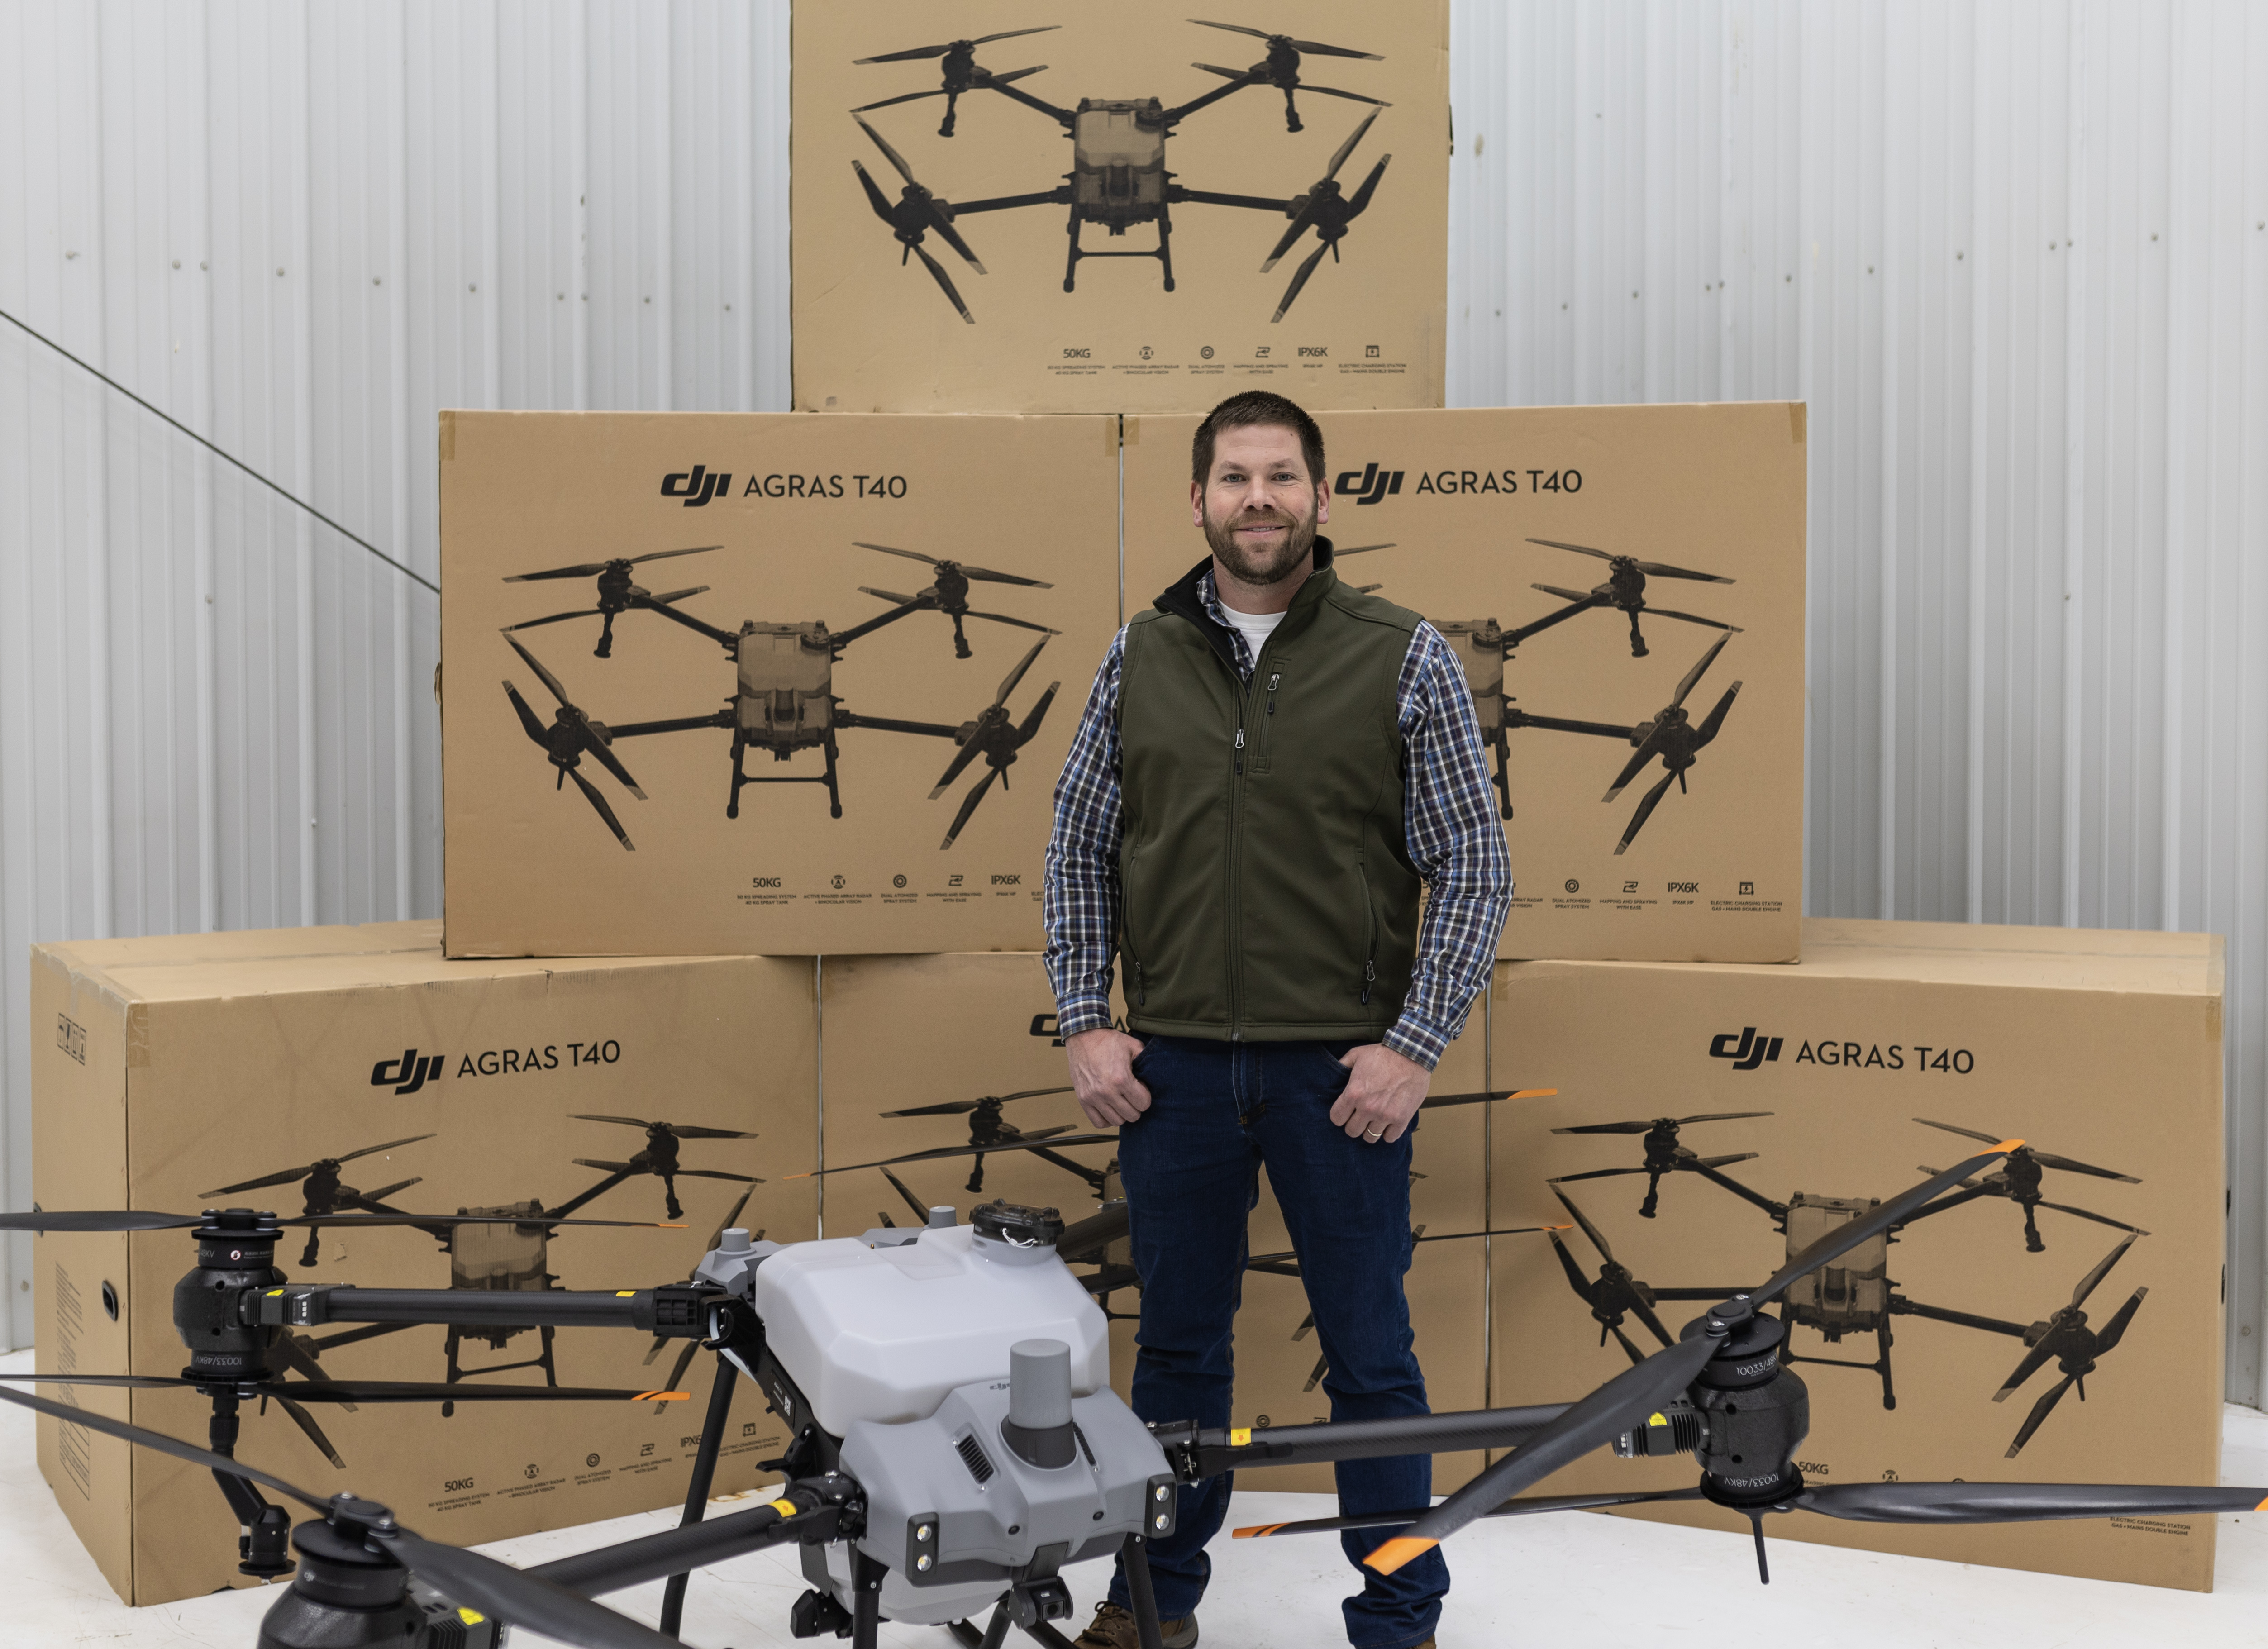 Tony Weber, General Manager of Green Creek Drone Company